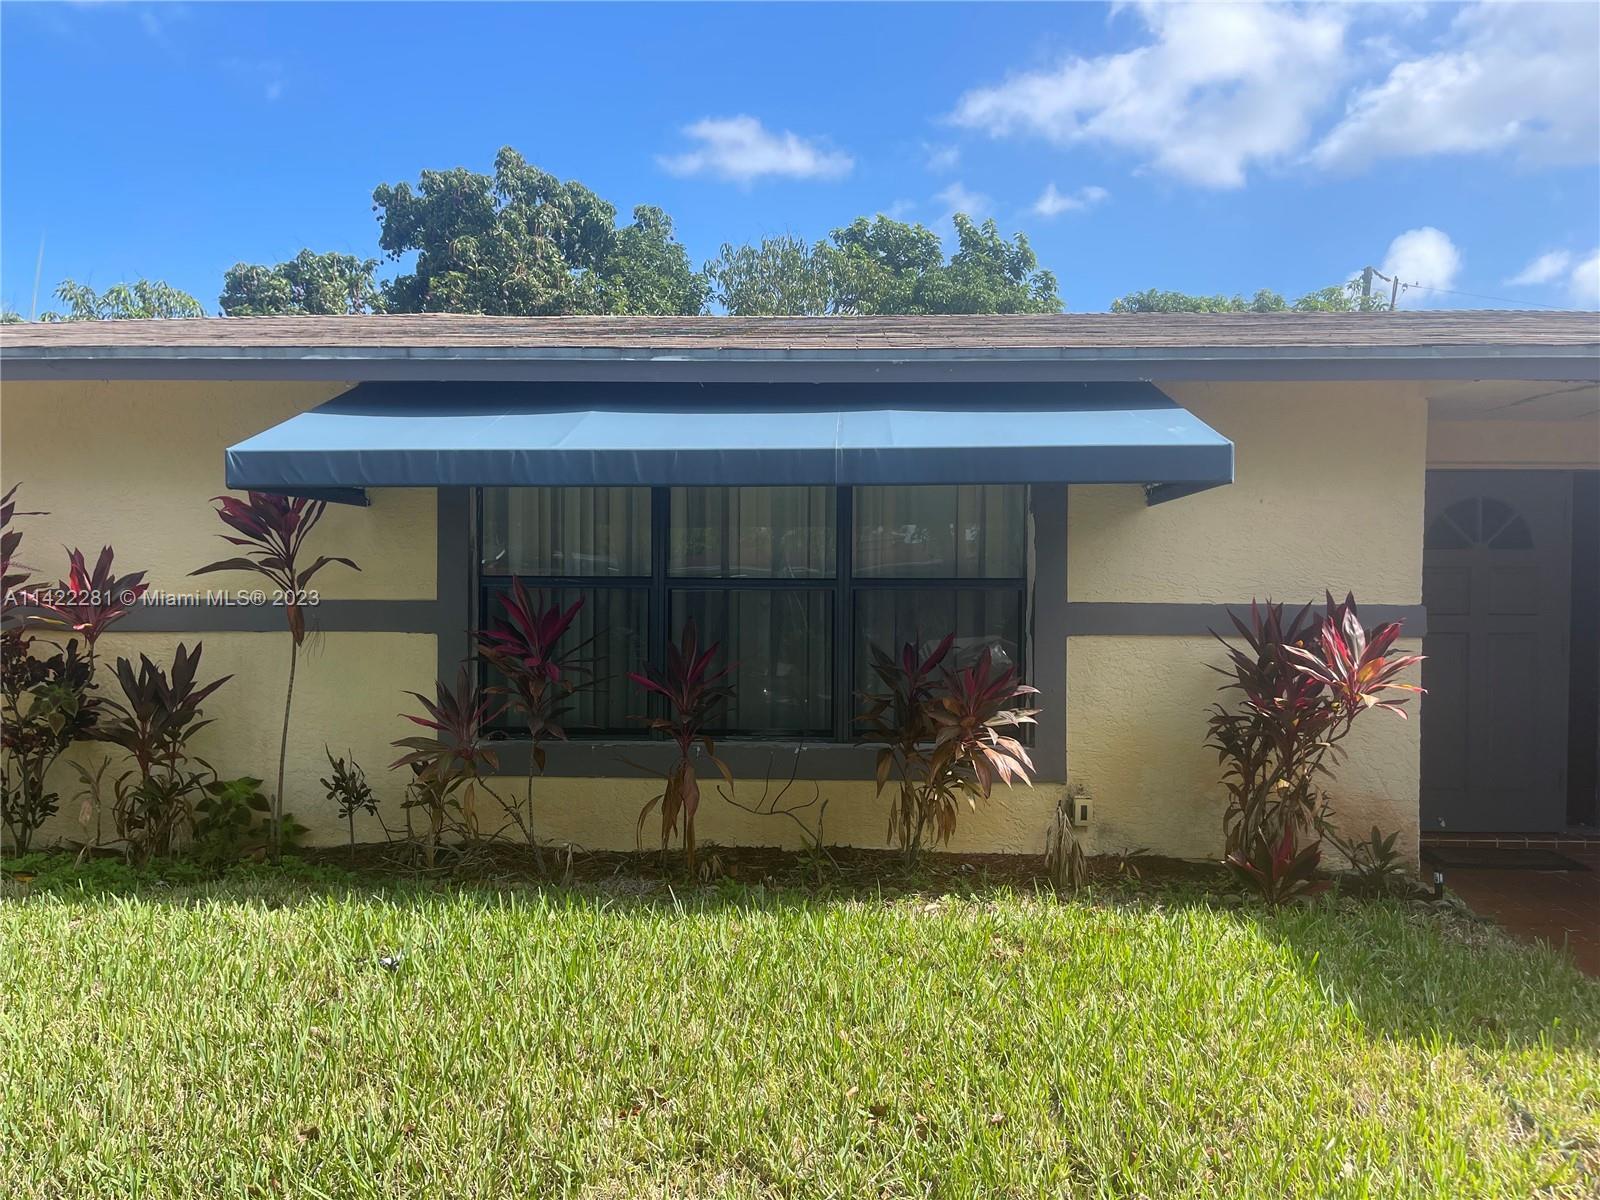 Must See! Remarkable 3Bed/2Bath Home Located in East Pompano Beach. Large Lot. House with Big Backya